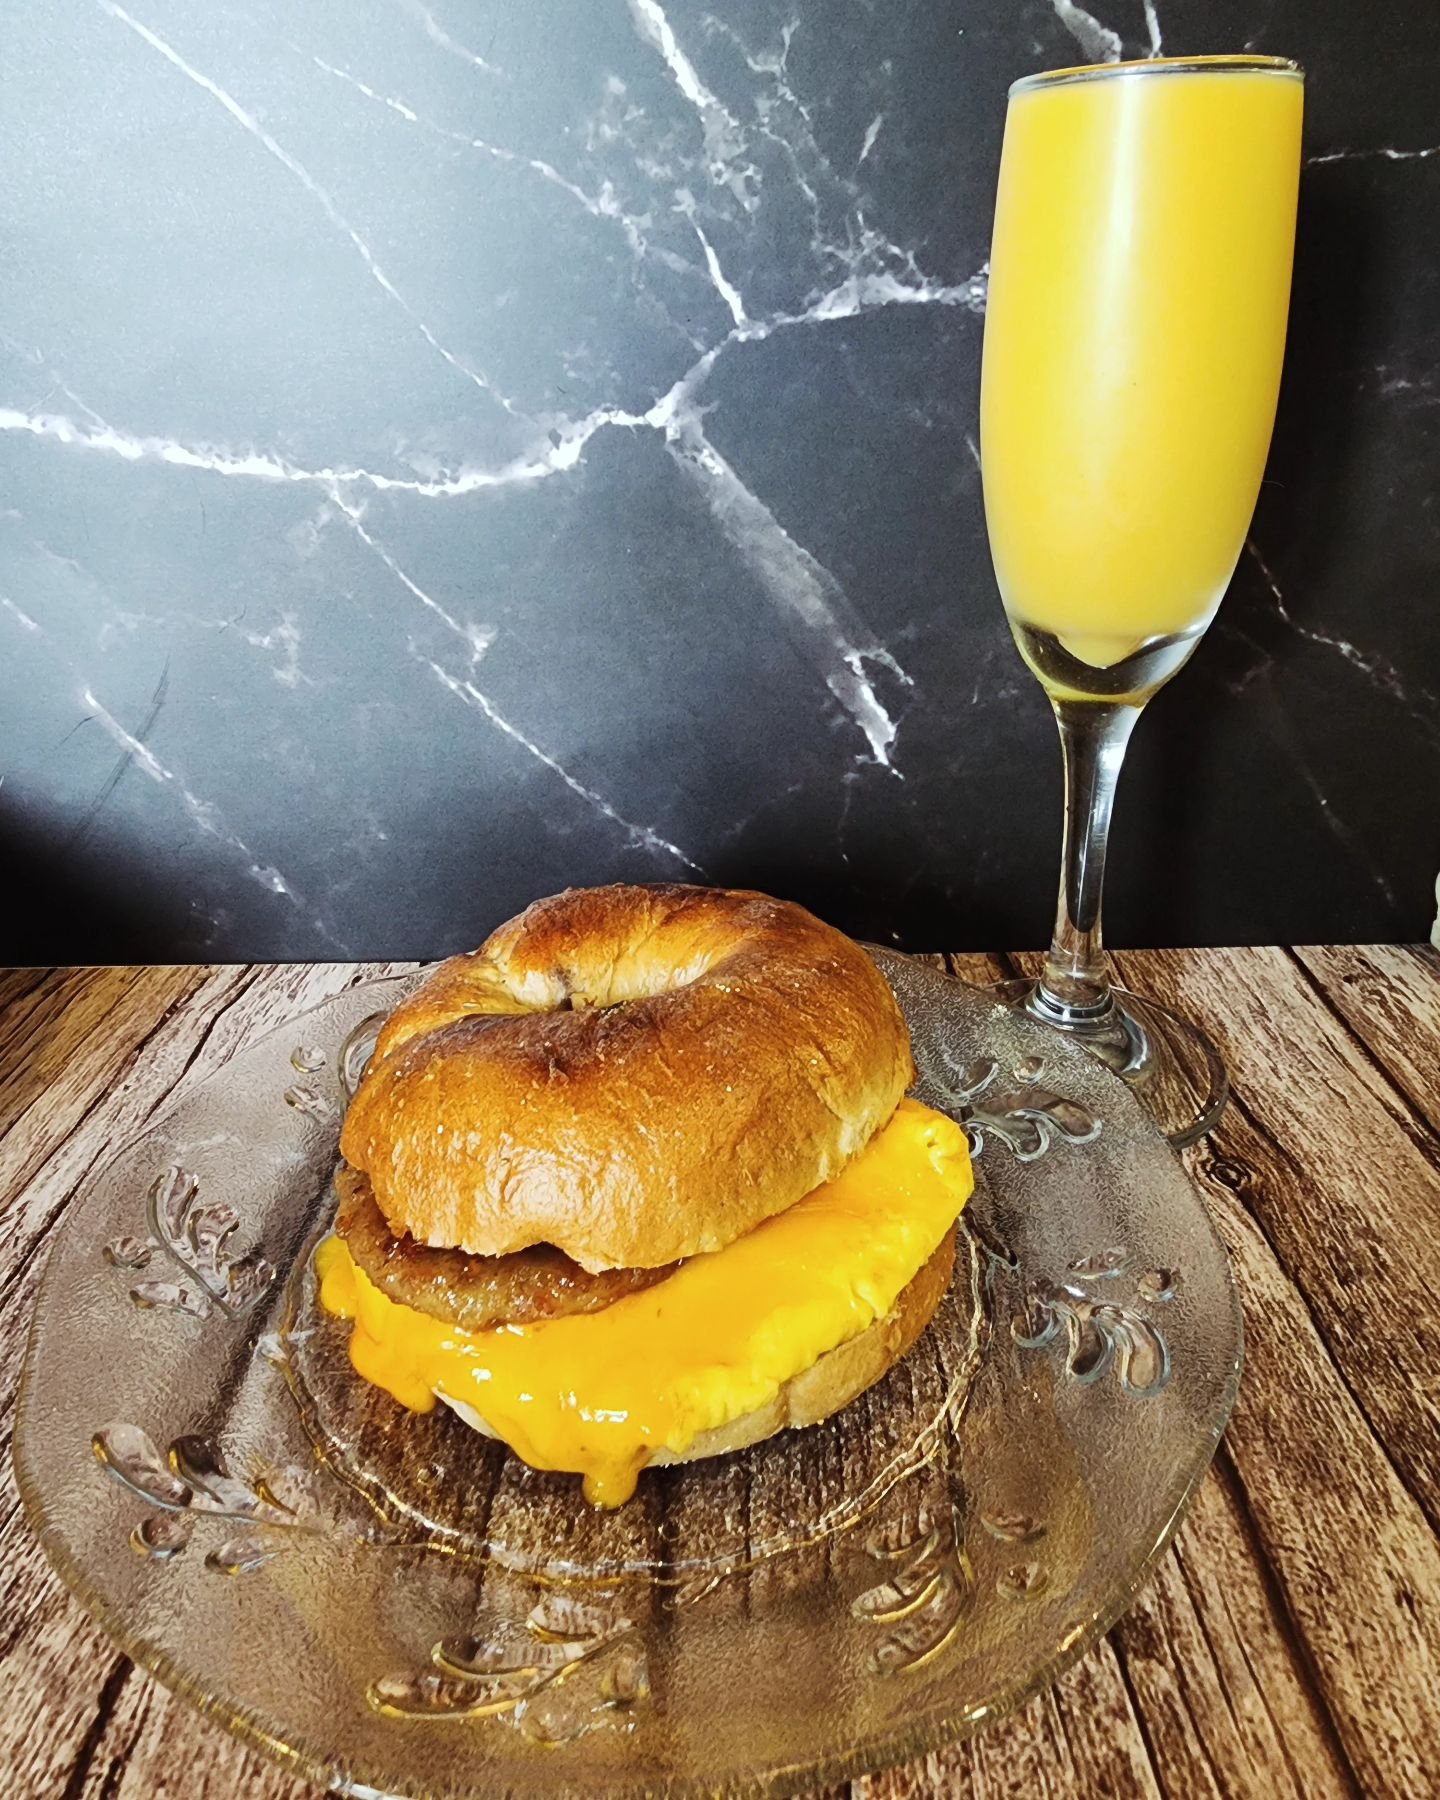 sunday funday
=
brunch + mimosas 🥂

》blueberry bagel sausage/egg sammie
》toasted coconut lattes

9-3 today
618-491-0901
4025 Pontoon Road 
Www.steelcitycheesecakes.com